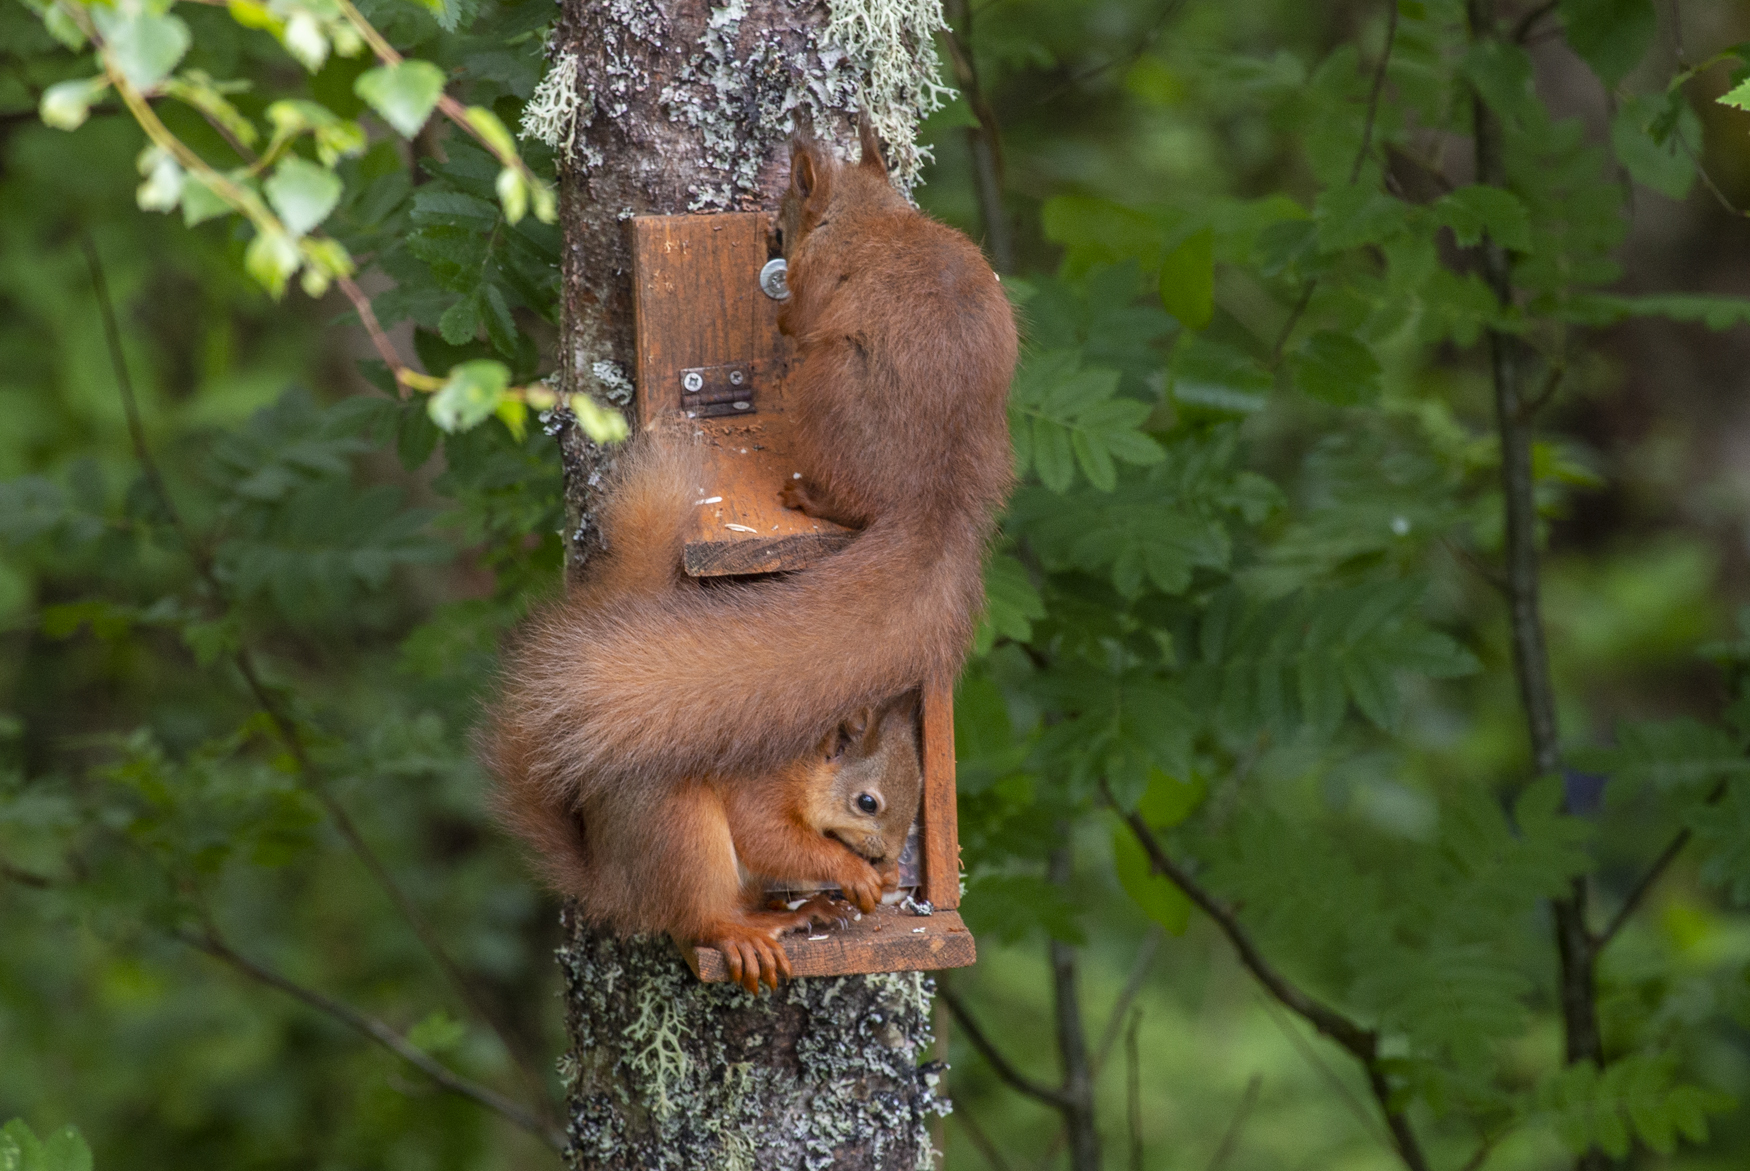 Young red squirrels on the squirrel feeder